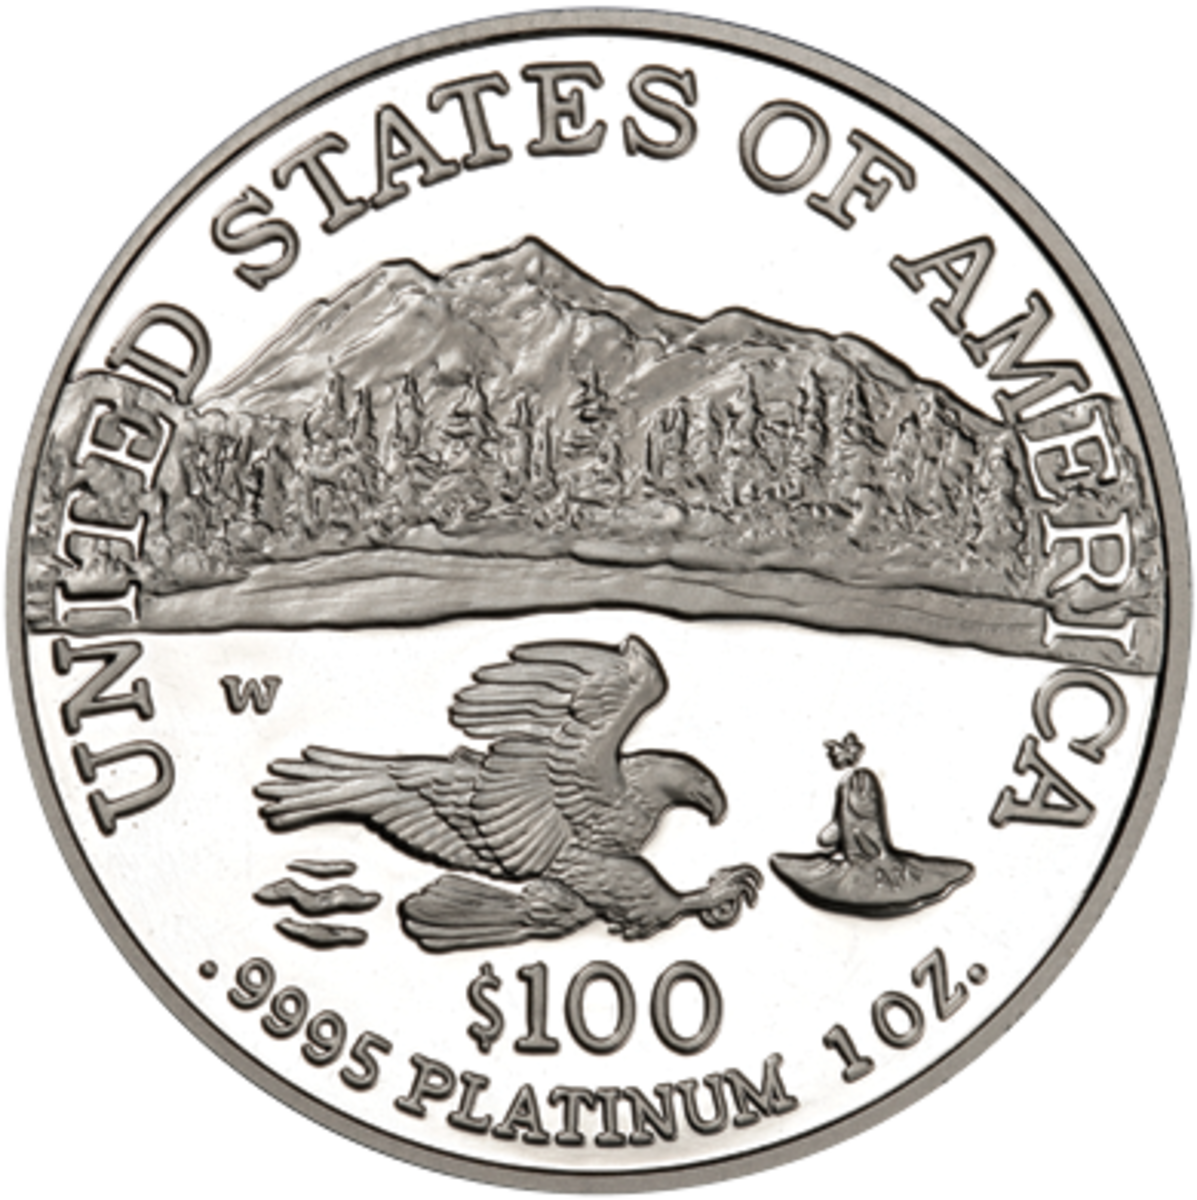 The reverse design of the 2002 one-ounce platinum eagle features and eagle fishing in America’s Northwest. (Image courtesy of Numismaster.com